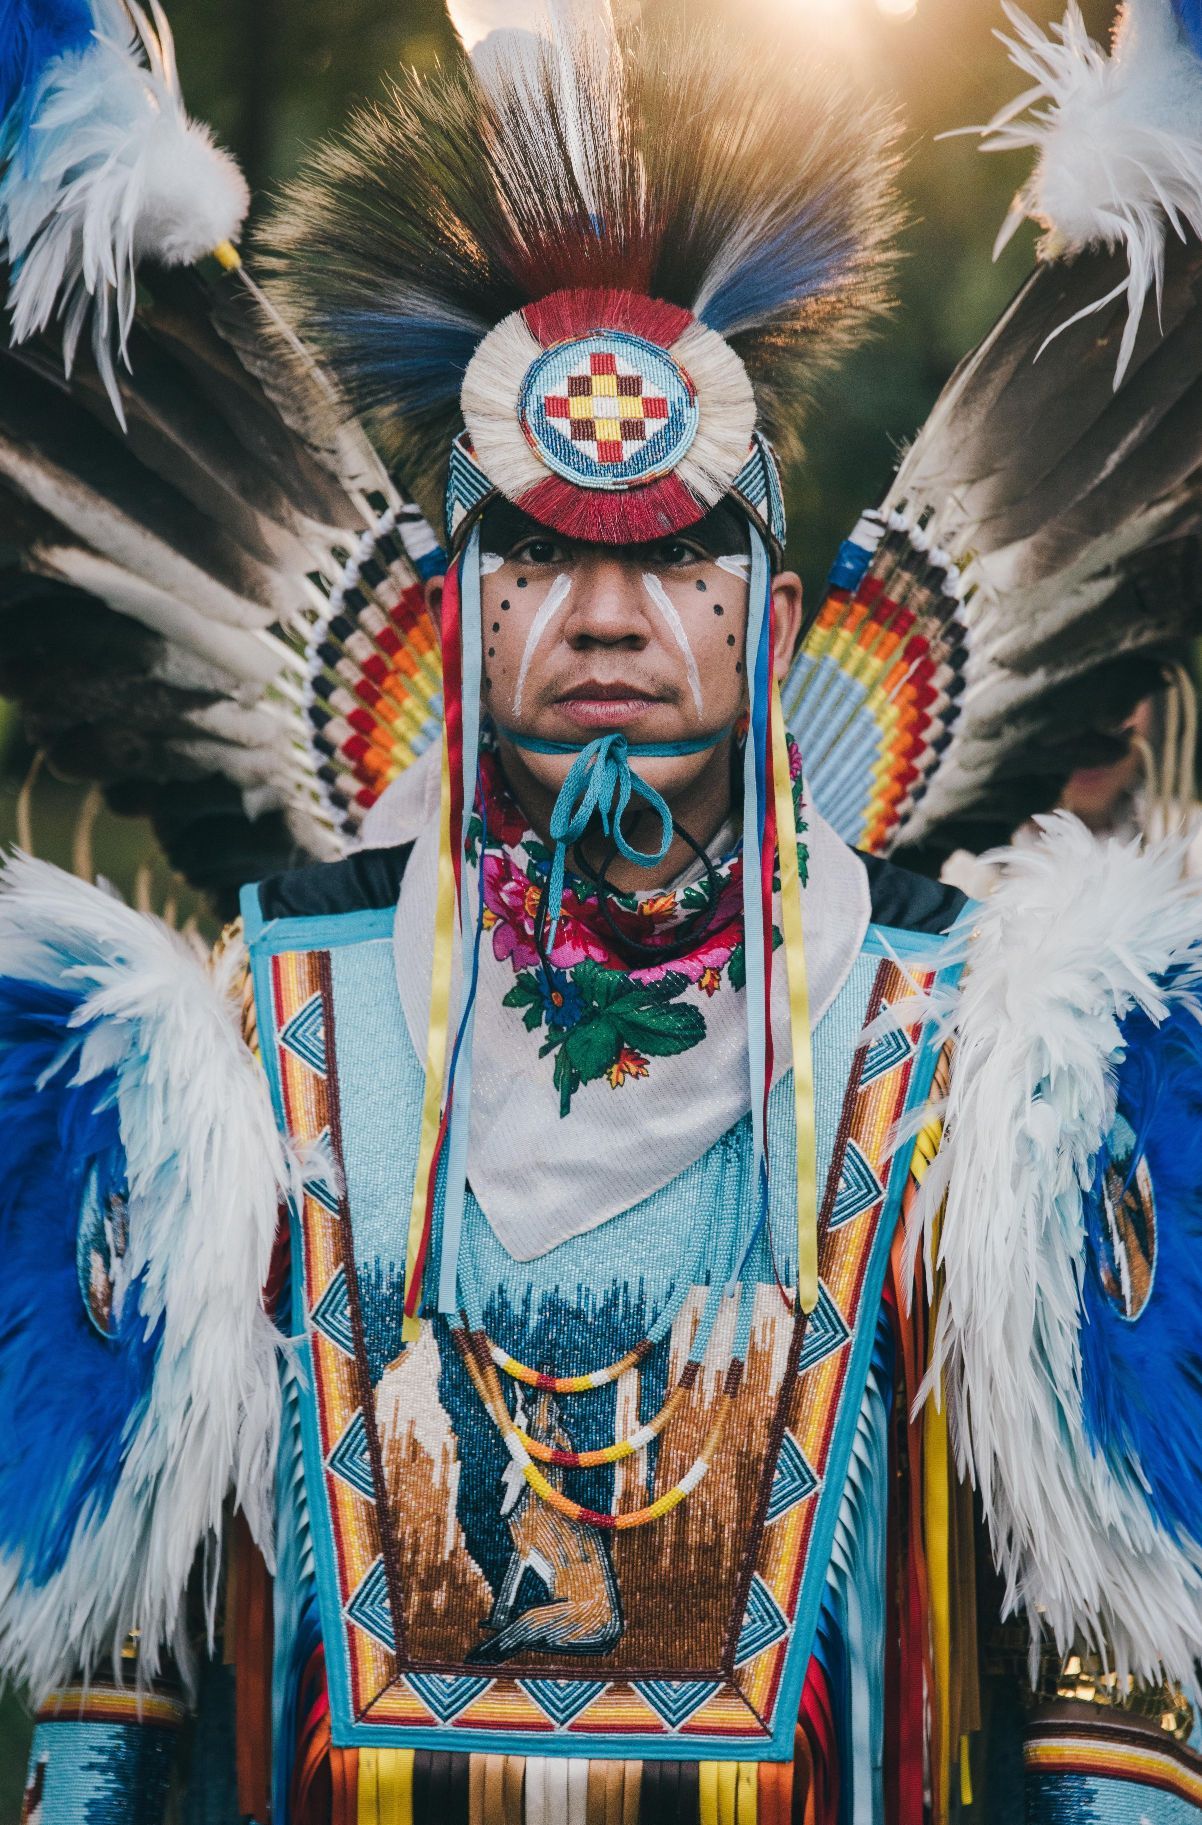 A remarkable photograph of Christian, an indigenous Navajo man, in his full regalia. Photo: Ian Finch